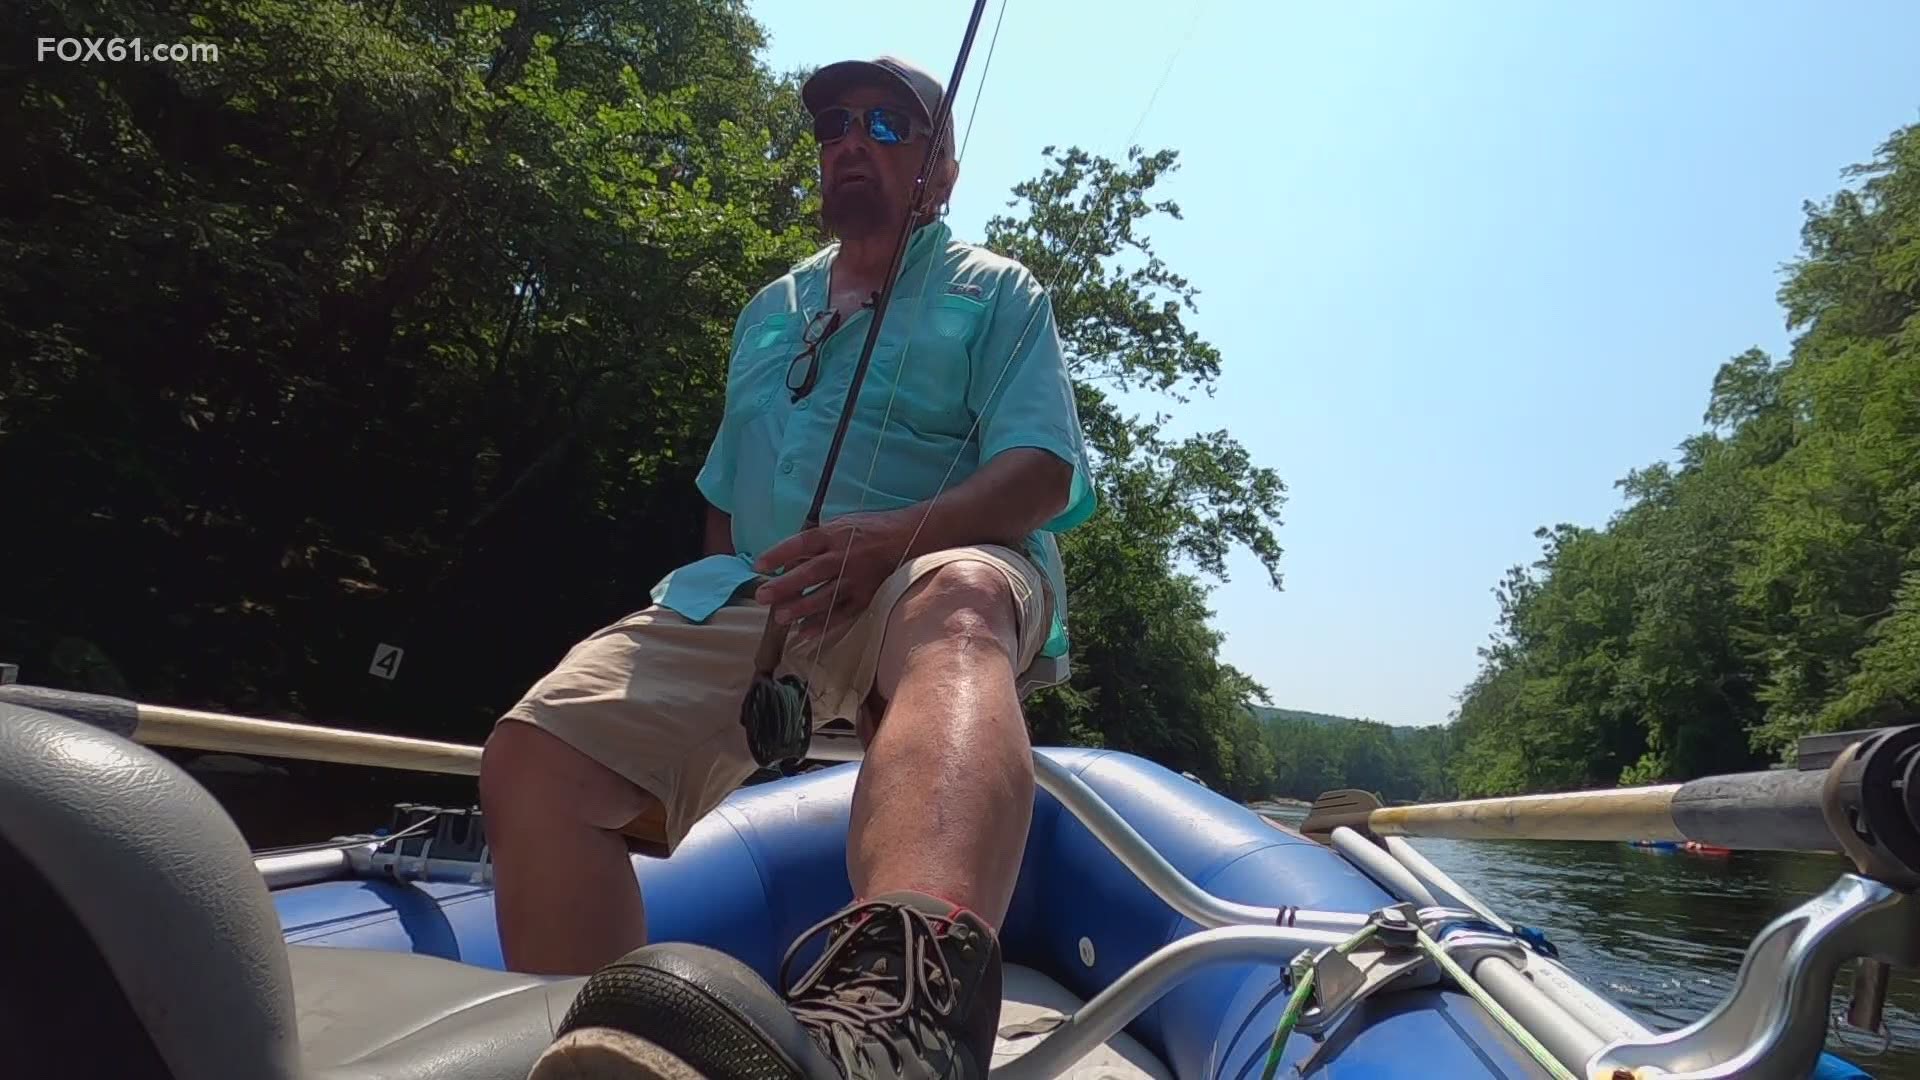 The month of July has been a challenge for guides like Seth Boynick who owns Farmington River Trading.